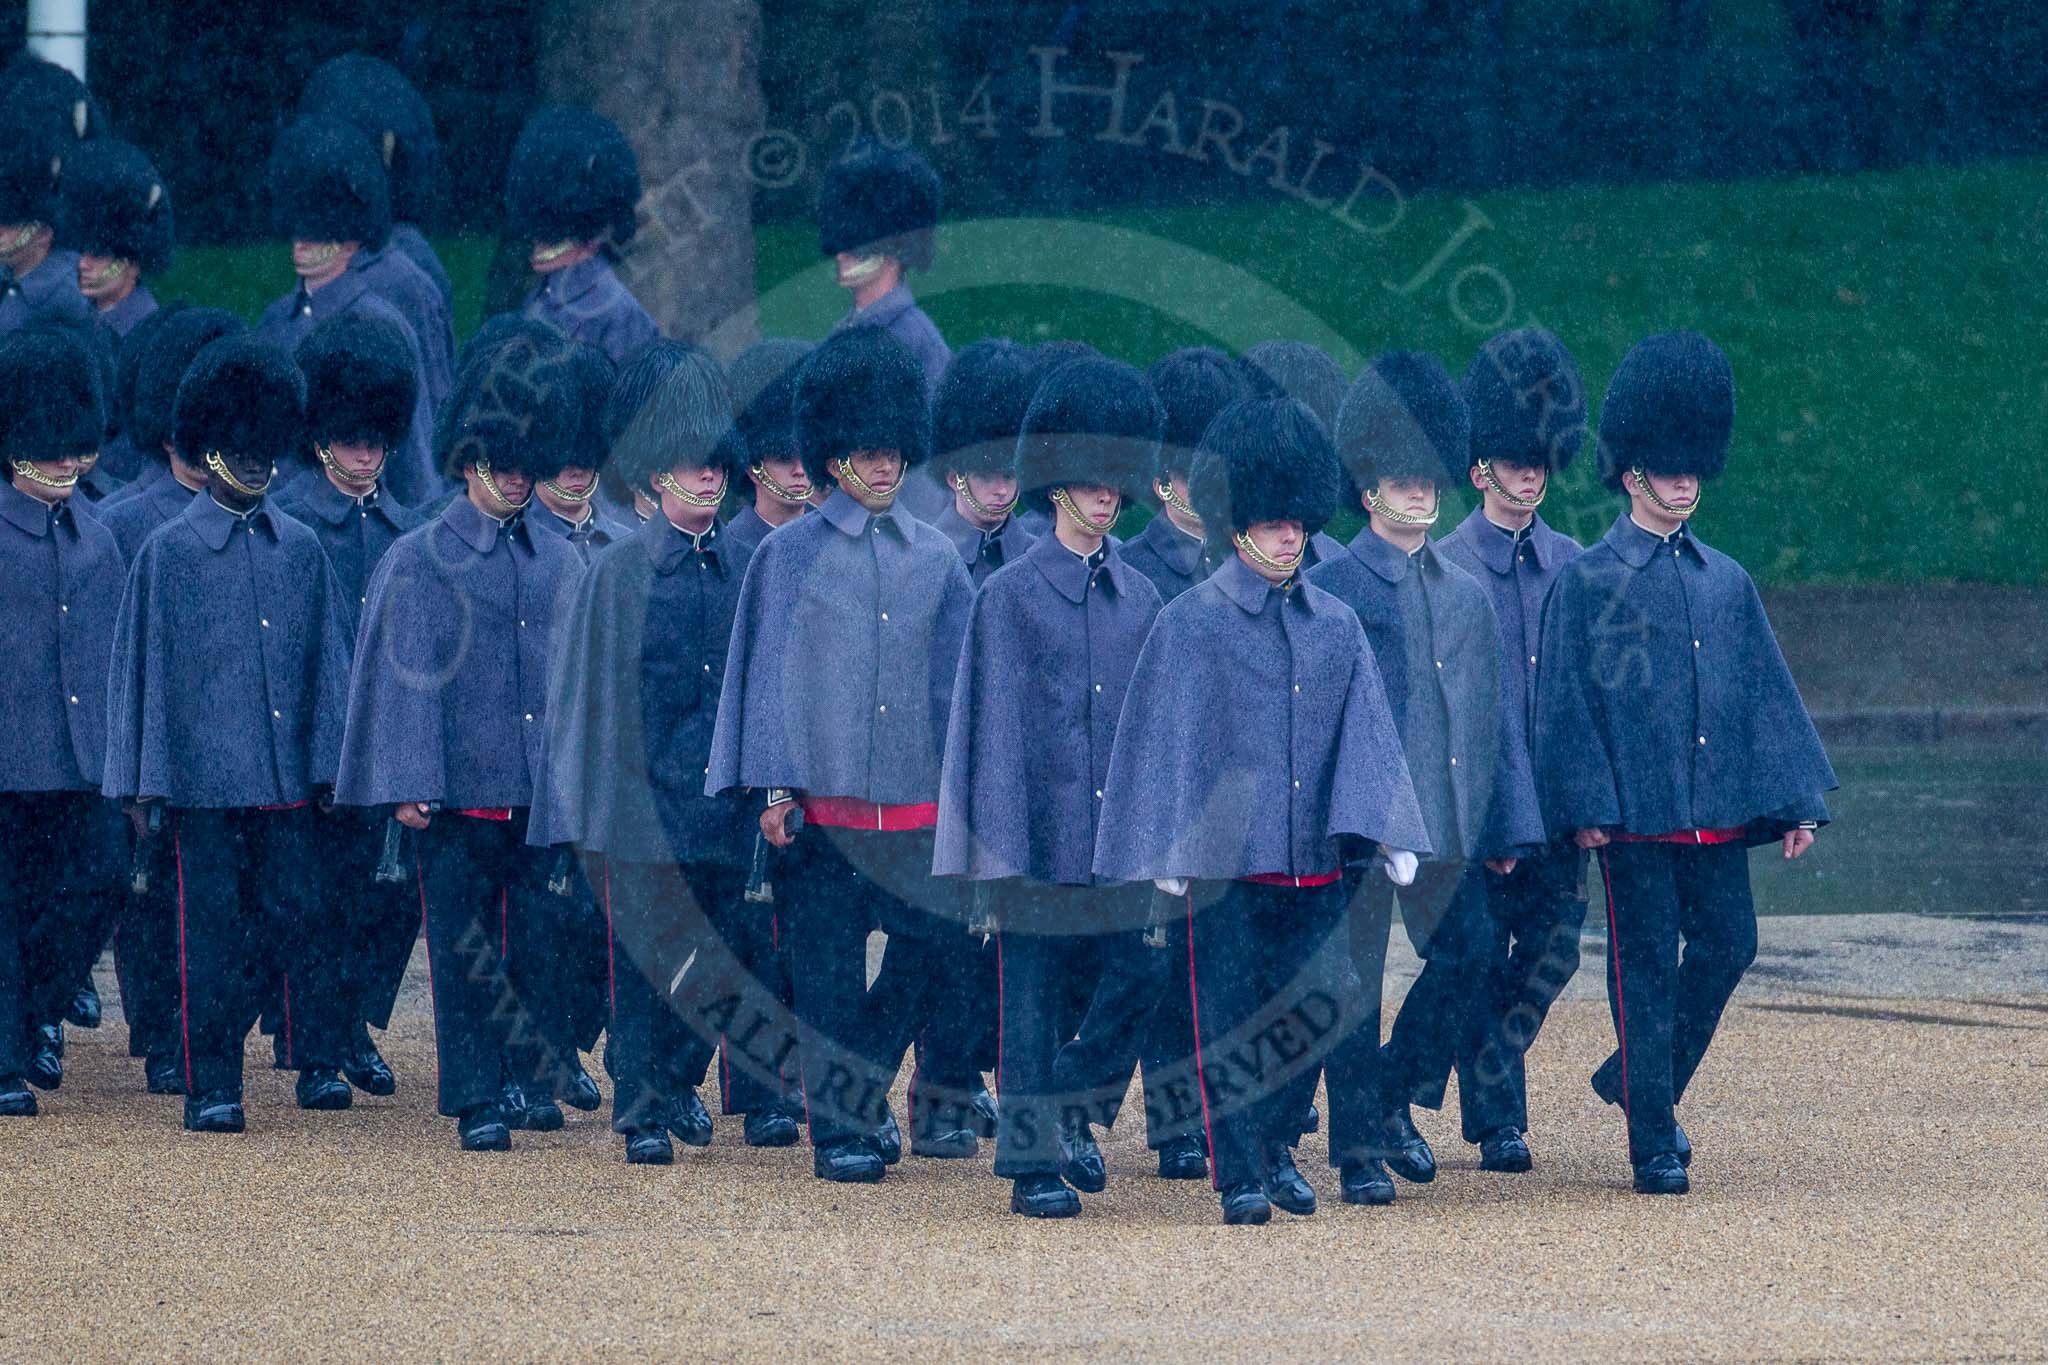 The Colonel's Review 2014.
Horse Guards Parade, Westminster,
London,

United Kingdom,
on 07 June 2014 at 10:17, image #83